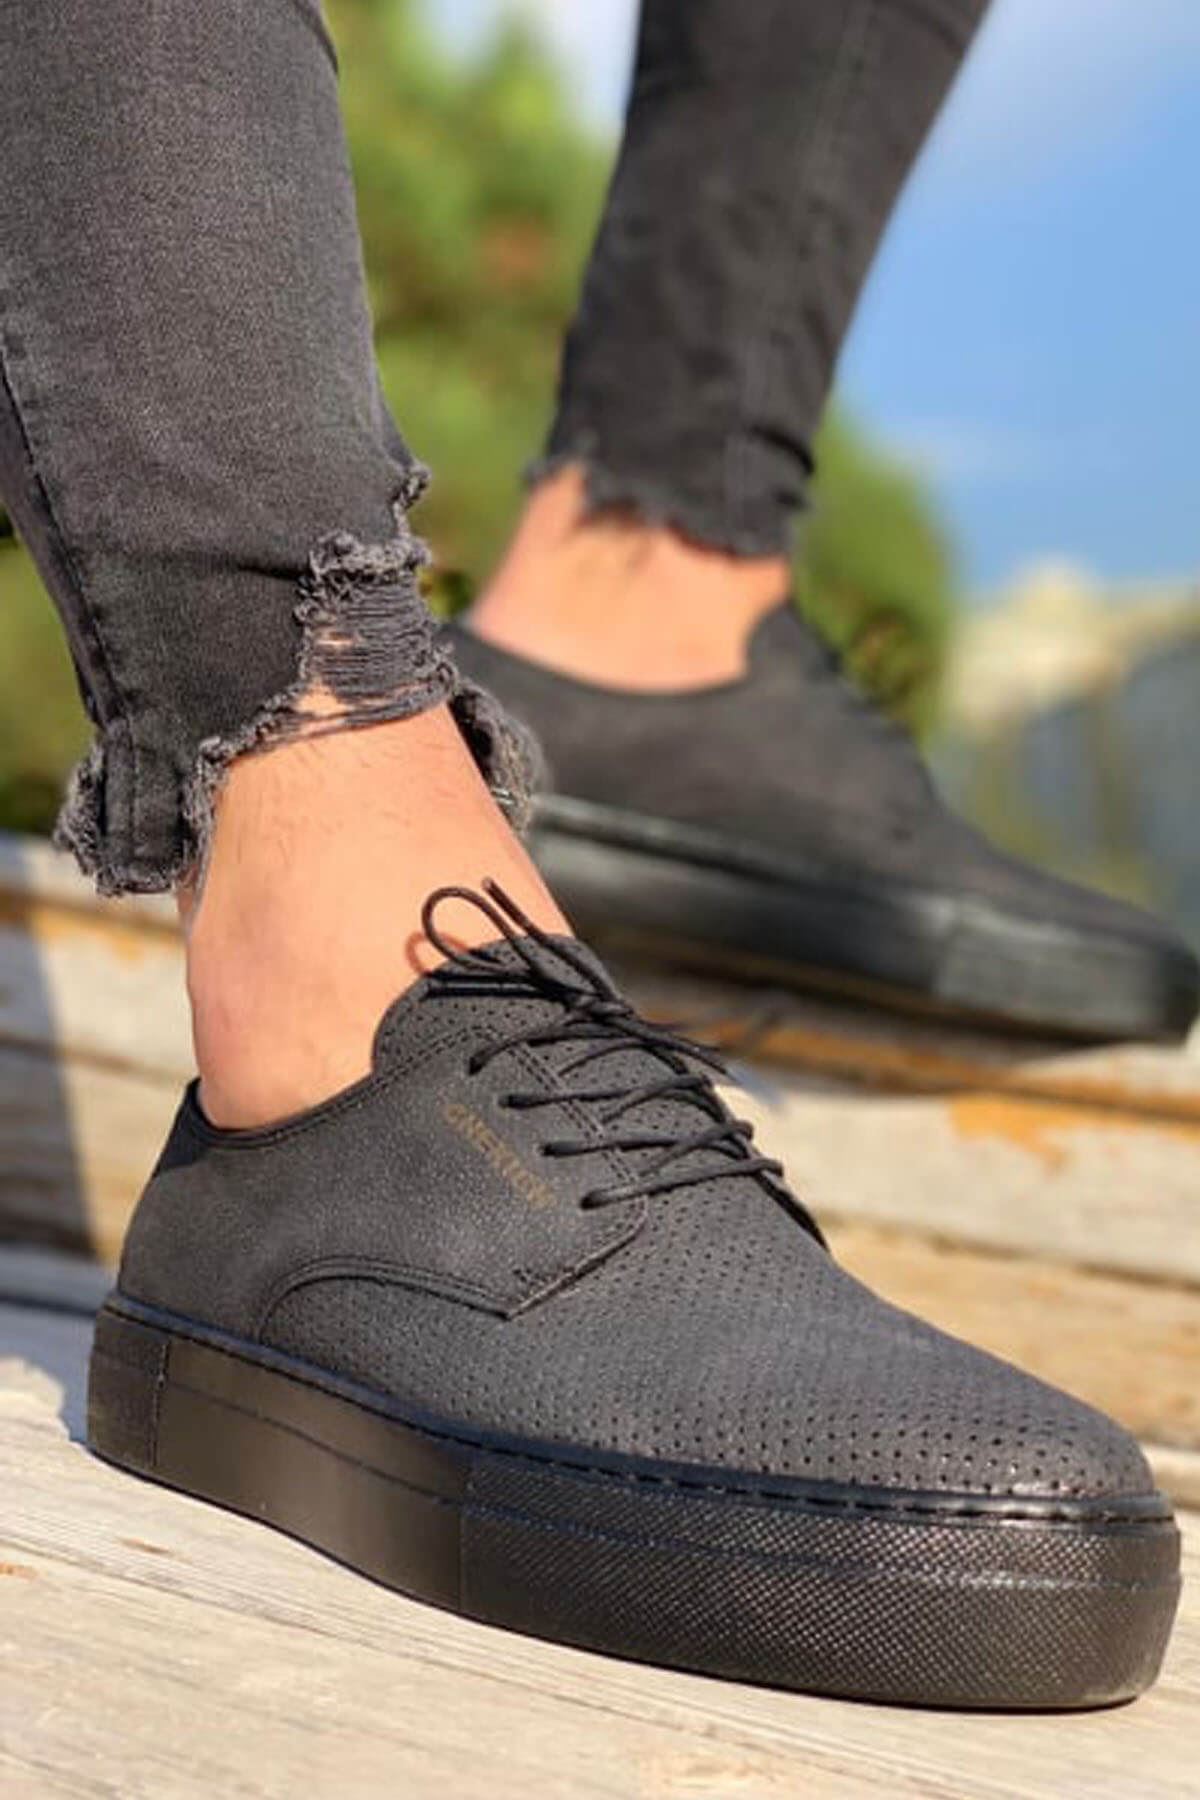 Chekich Women's and Men's Casual Shoes Black Color Faux Leather Lace Up Spring Autumn Seasons Unisex Classic Sneakers Solid Lightweight Comfortable Lovers Board Office Footwear Ladies Gentlemens Fashion CH061 V6